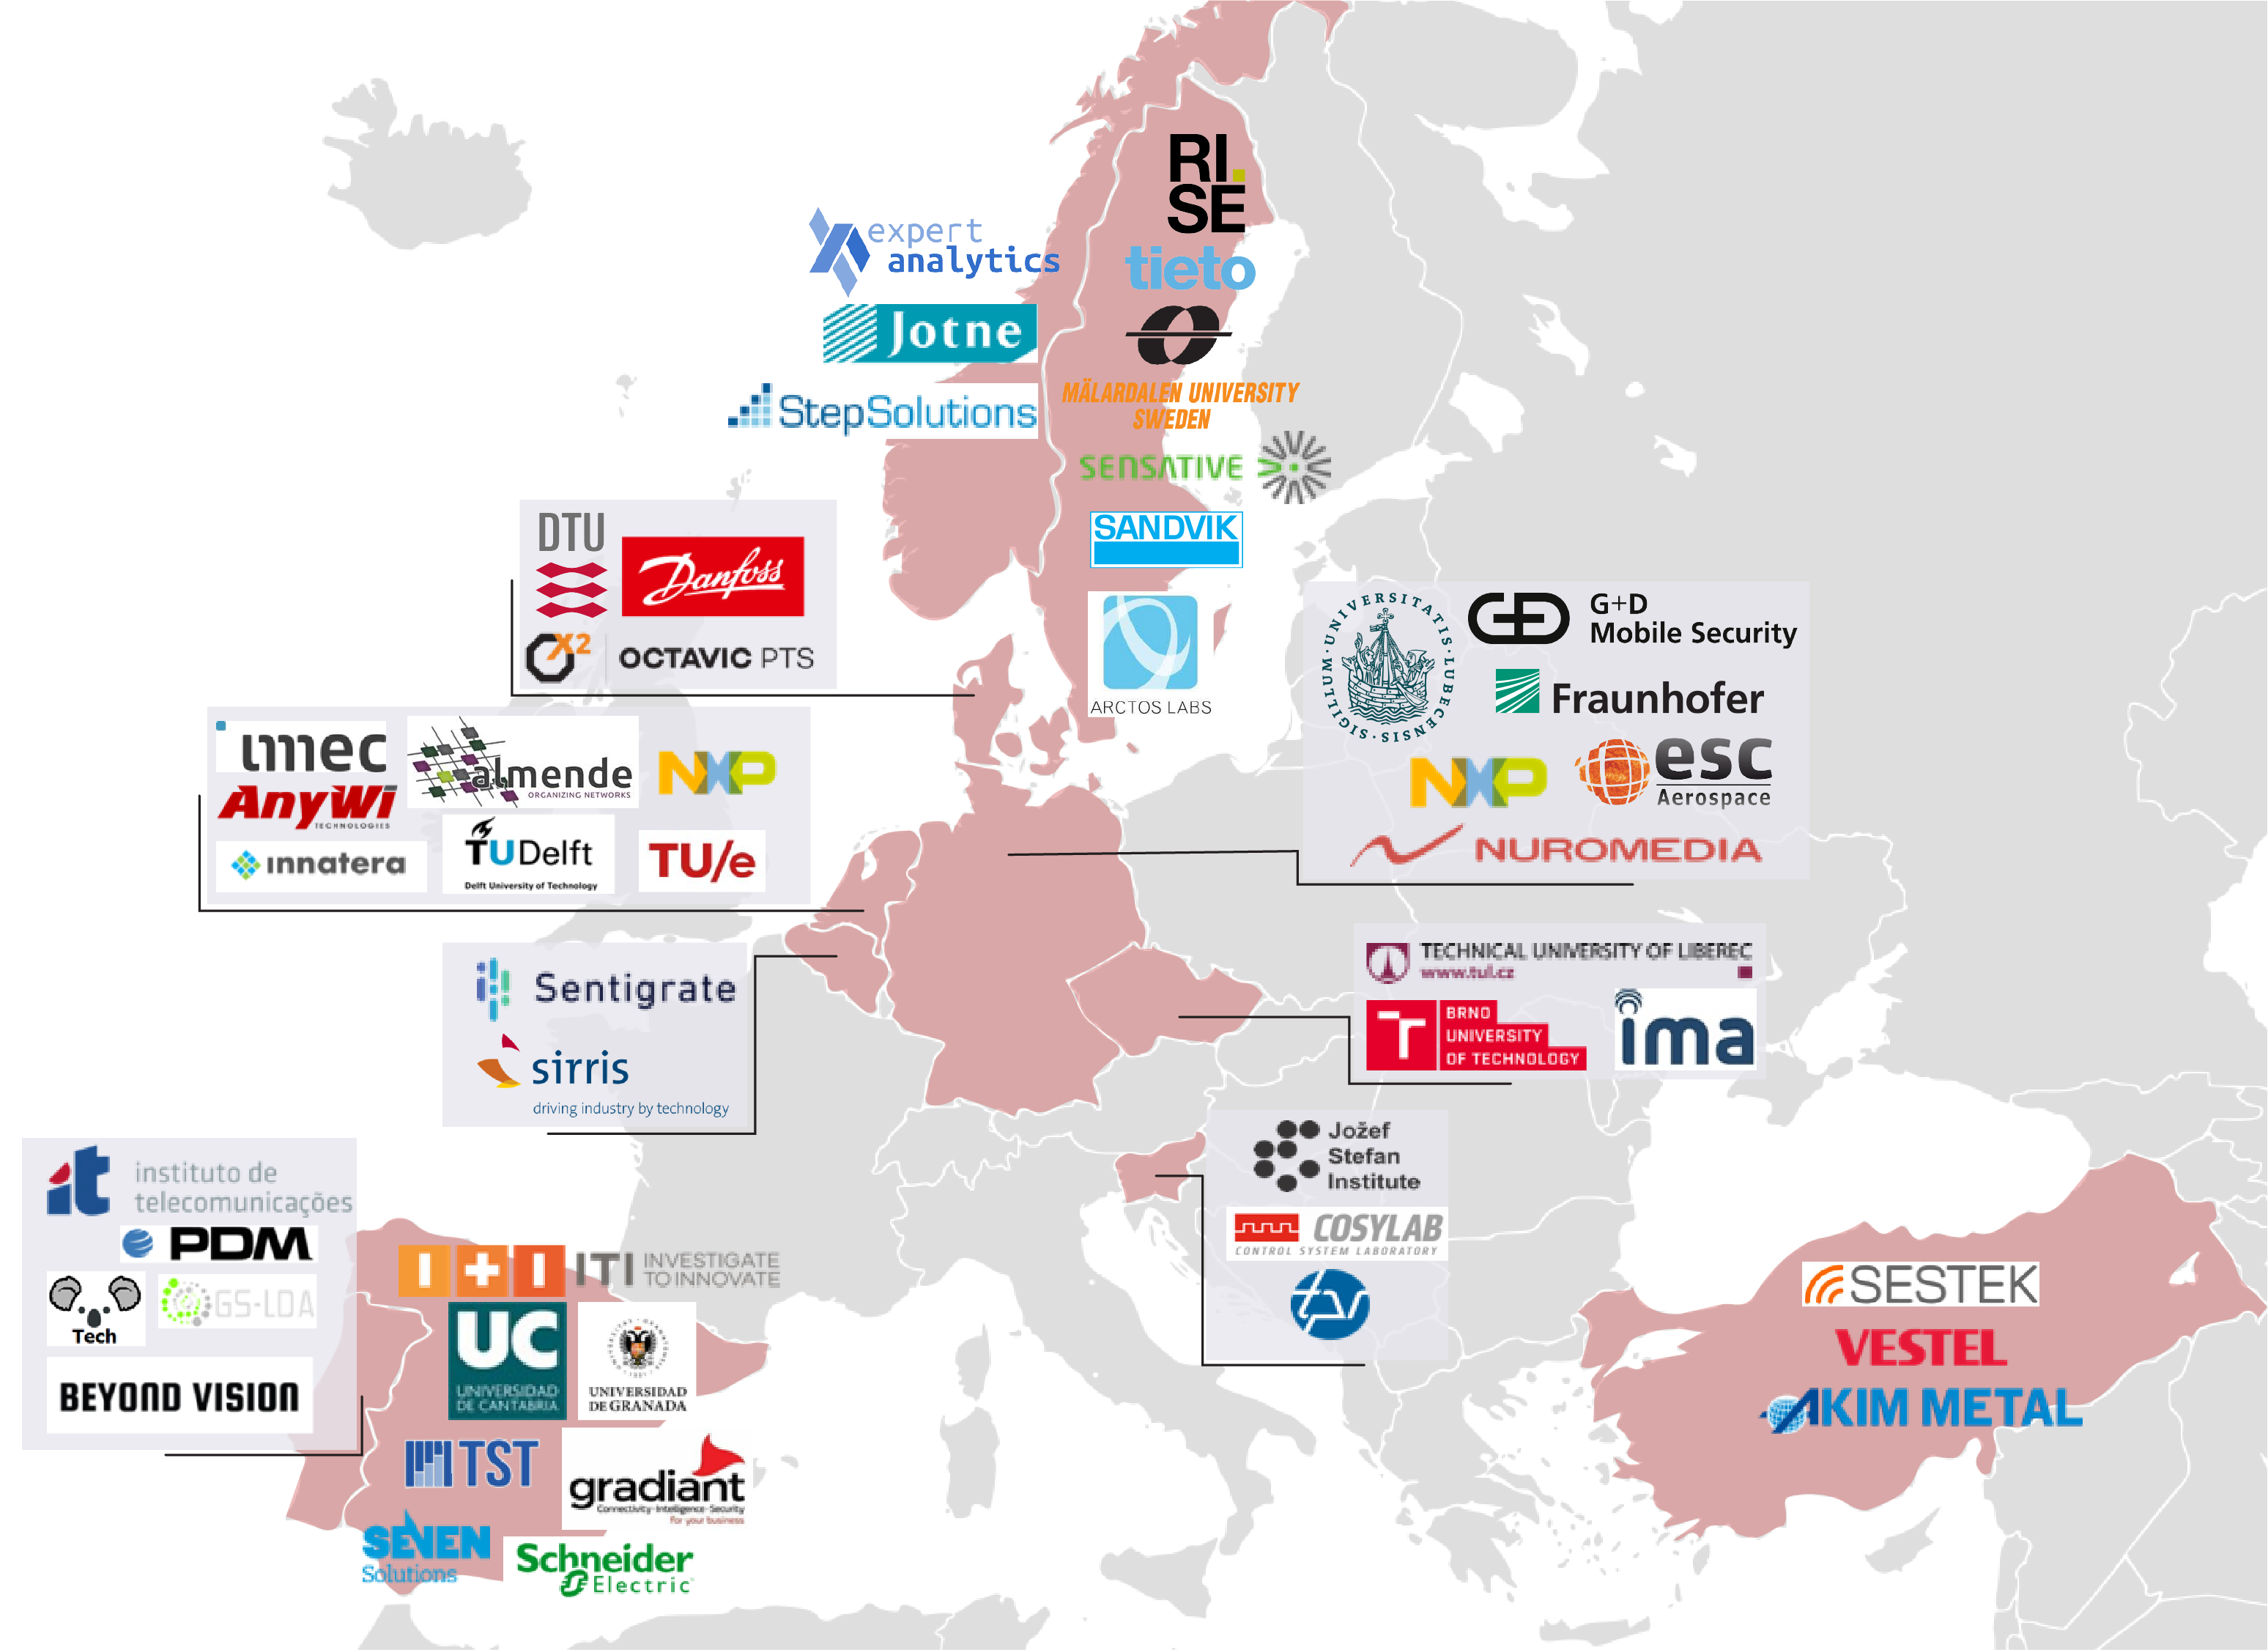 Overview of the partners in the DAIS-project